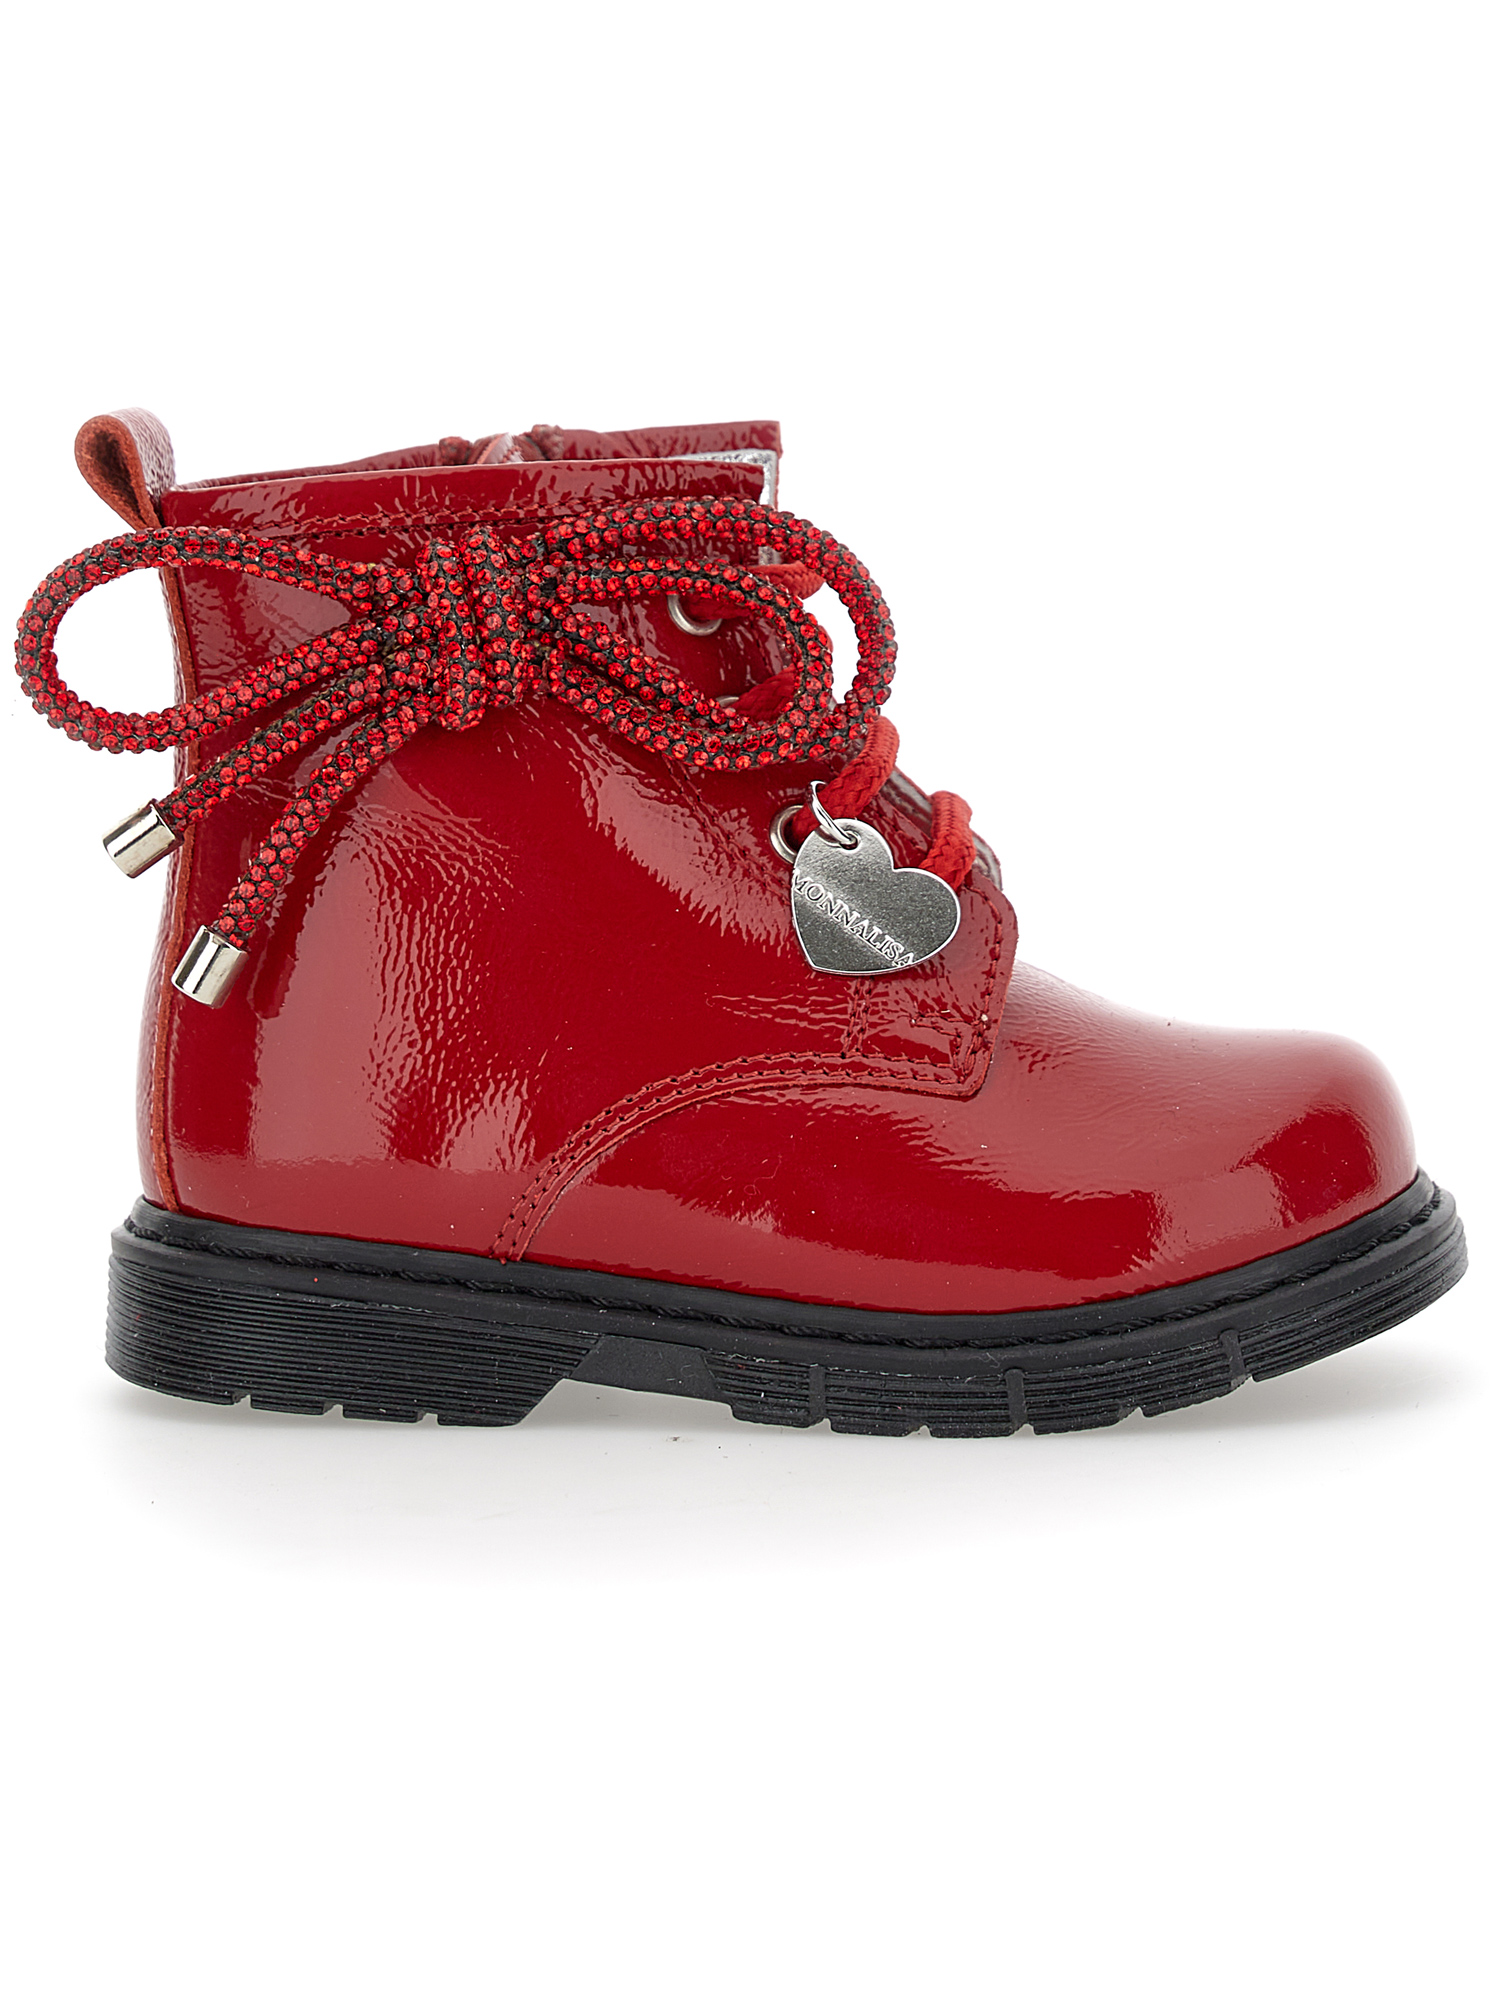 Monnalisa Patent Chrome Leather Ankle Boots In Ruby Red